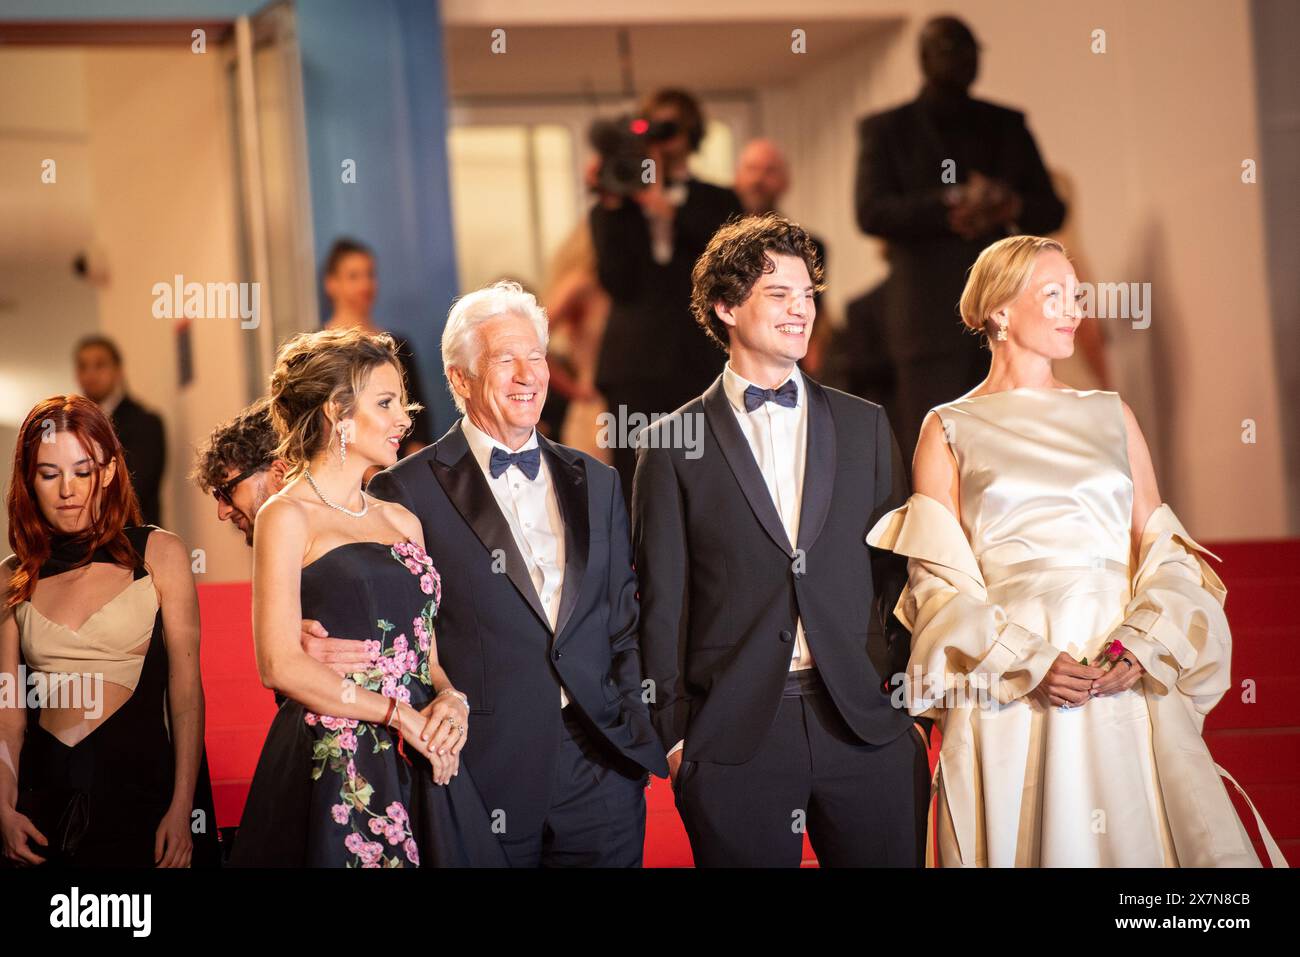 (L-R) Richard Gere, Allejandra Silva, Homer James Jigme Gere and Uma Thurman attend the "Oh, Canada" Red Carpet at the 77th annual Cannes Film Festival at Palais des Festivals. Stock Photo